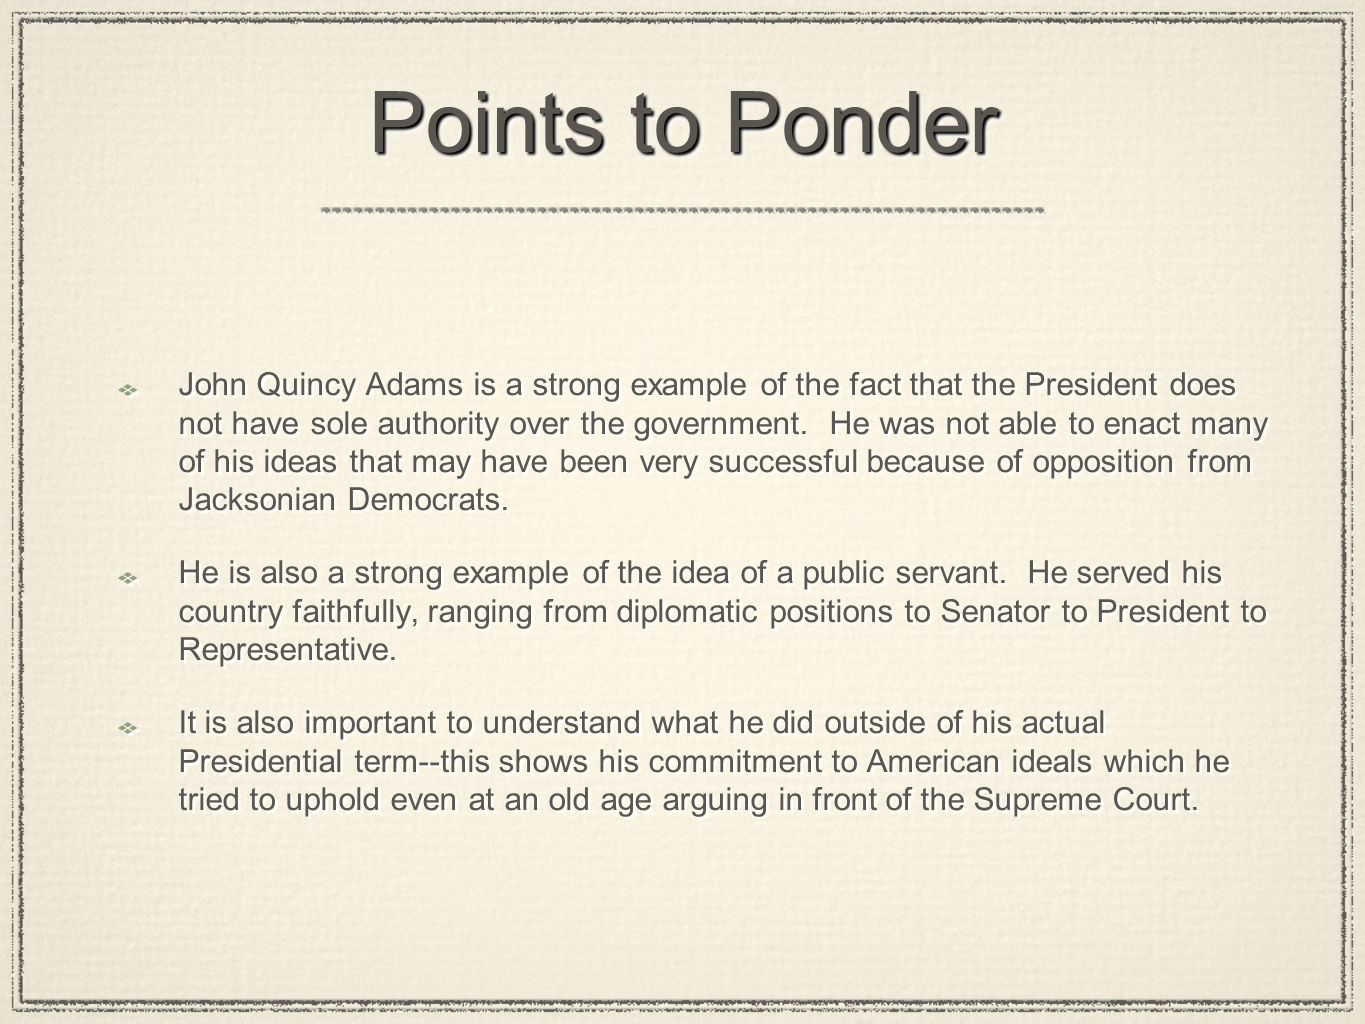 Points to Ponder John Quincy Adams is a strong example of the fact that the President does not have sole authority over the government.